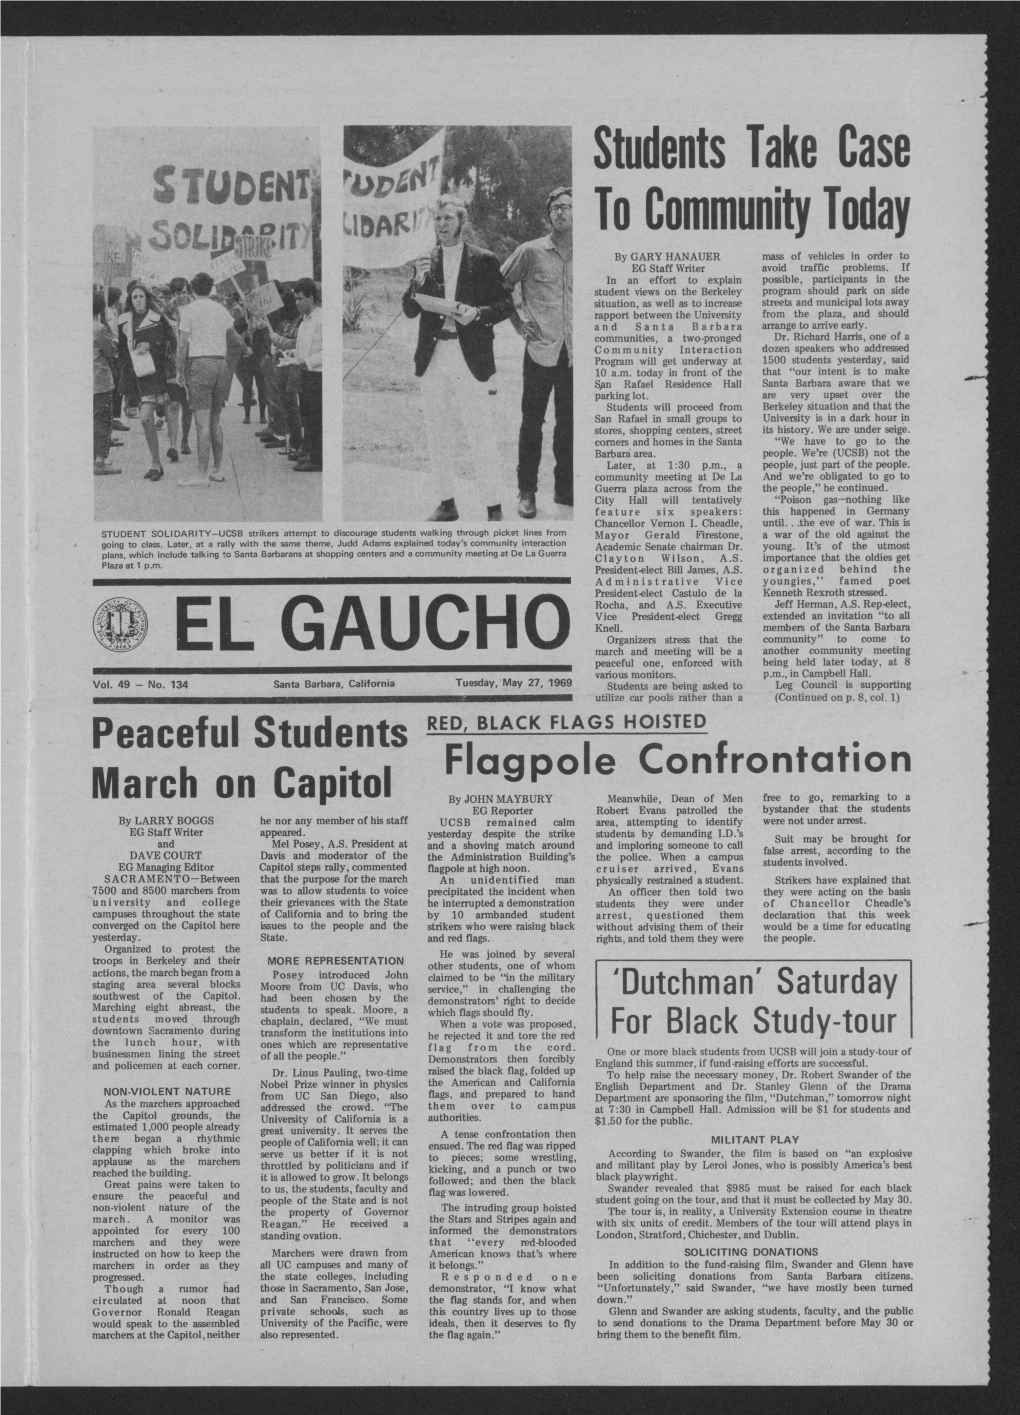 EL GAUCHO March and Meeting Will Be a Another Community Meeting Peaceful One, Enforced with Being Held Later Today, at 8 Various Monitors